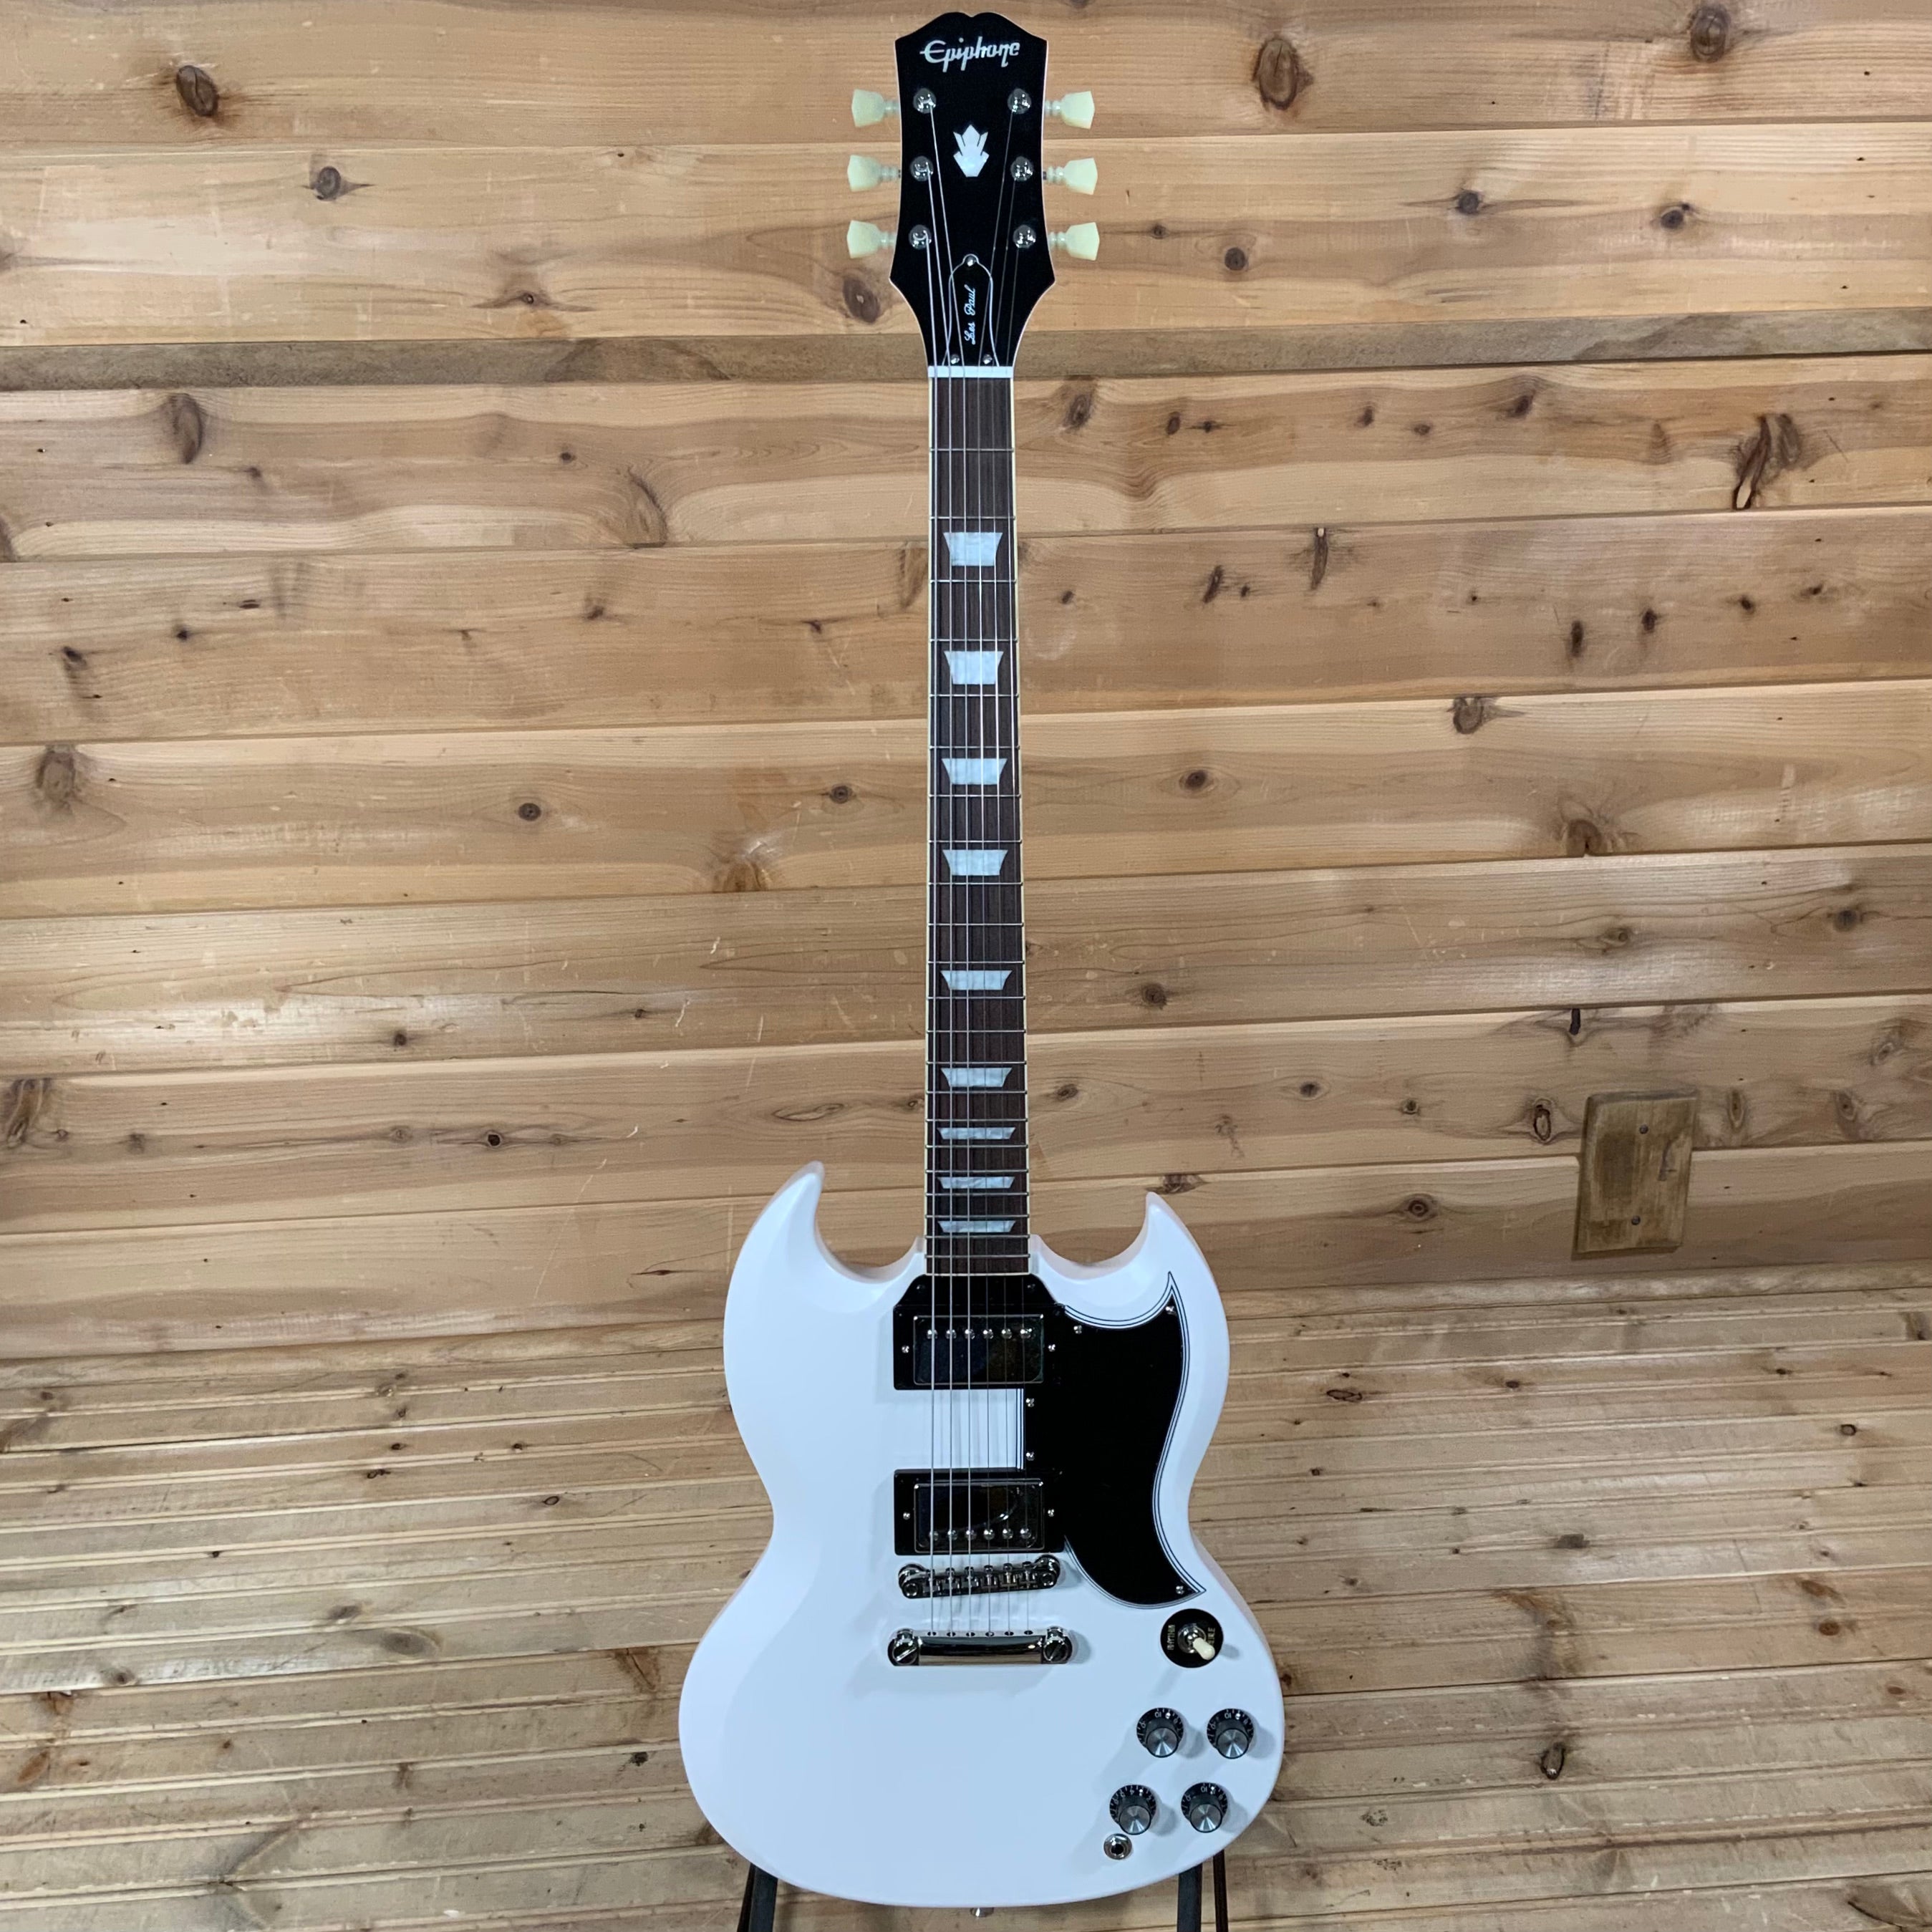 Epiphone 1961 Les Paul SG Standard Electric Guitar - Aged Classic White